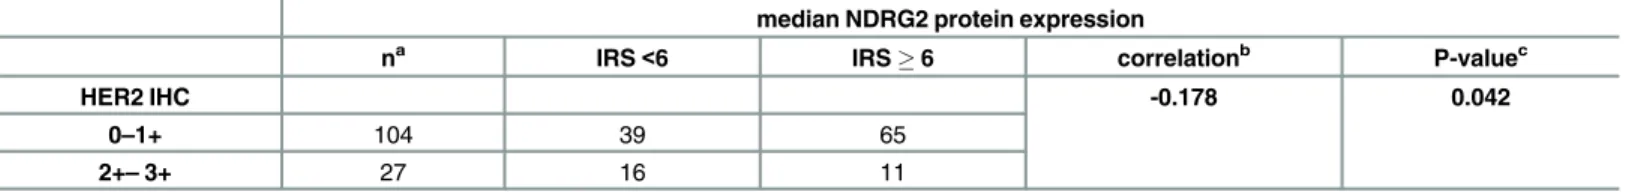 Table 2. Correlation of the NDRG2 protein expression with HER2-receptor expression.